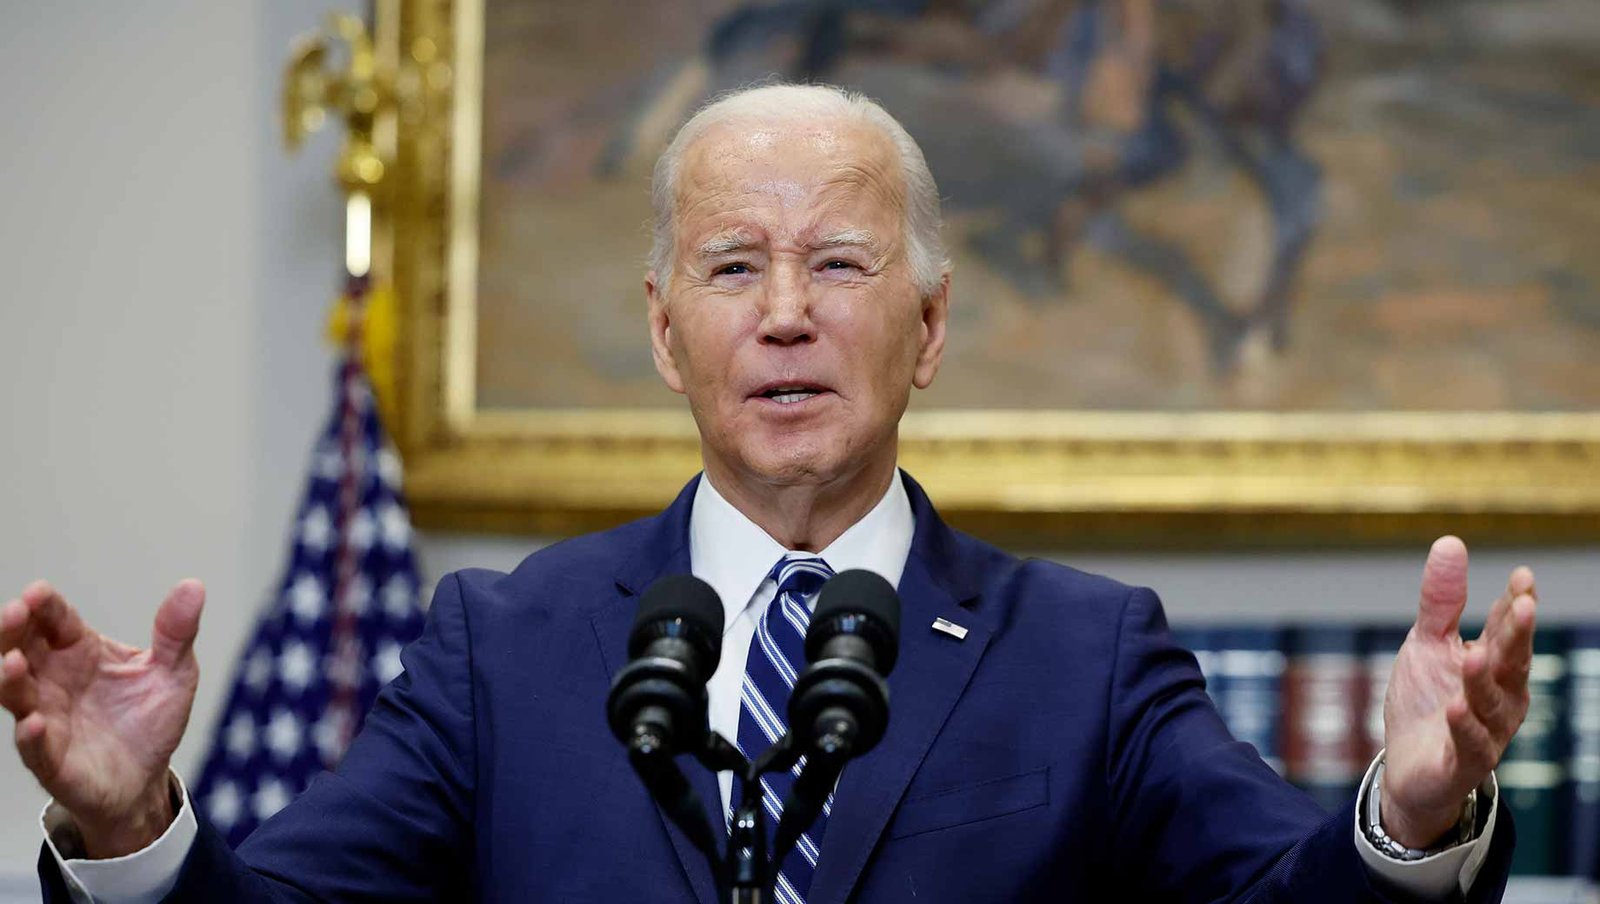 Biden's Approval Rating Plummets to 38% in Latest Gallup Poll